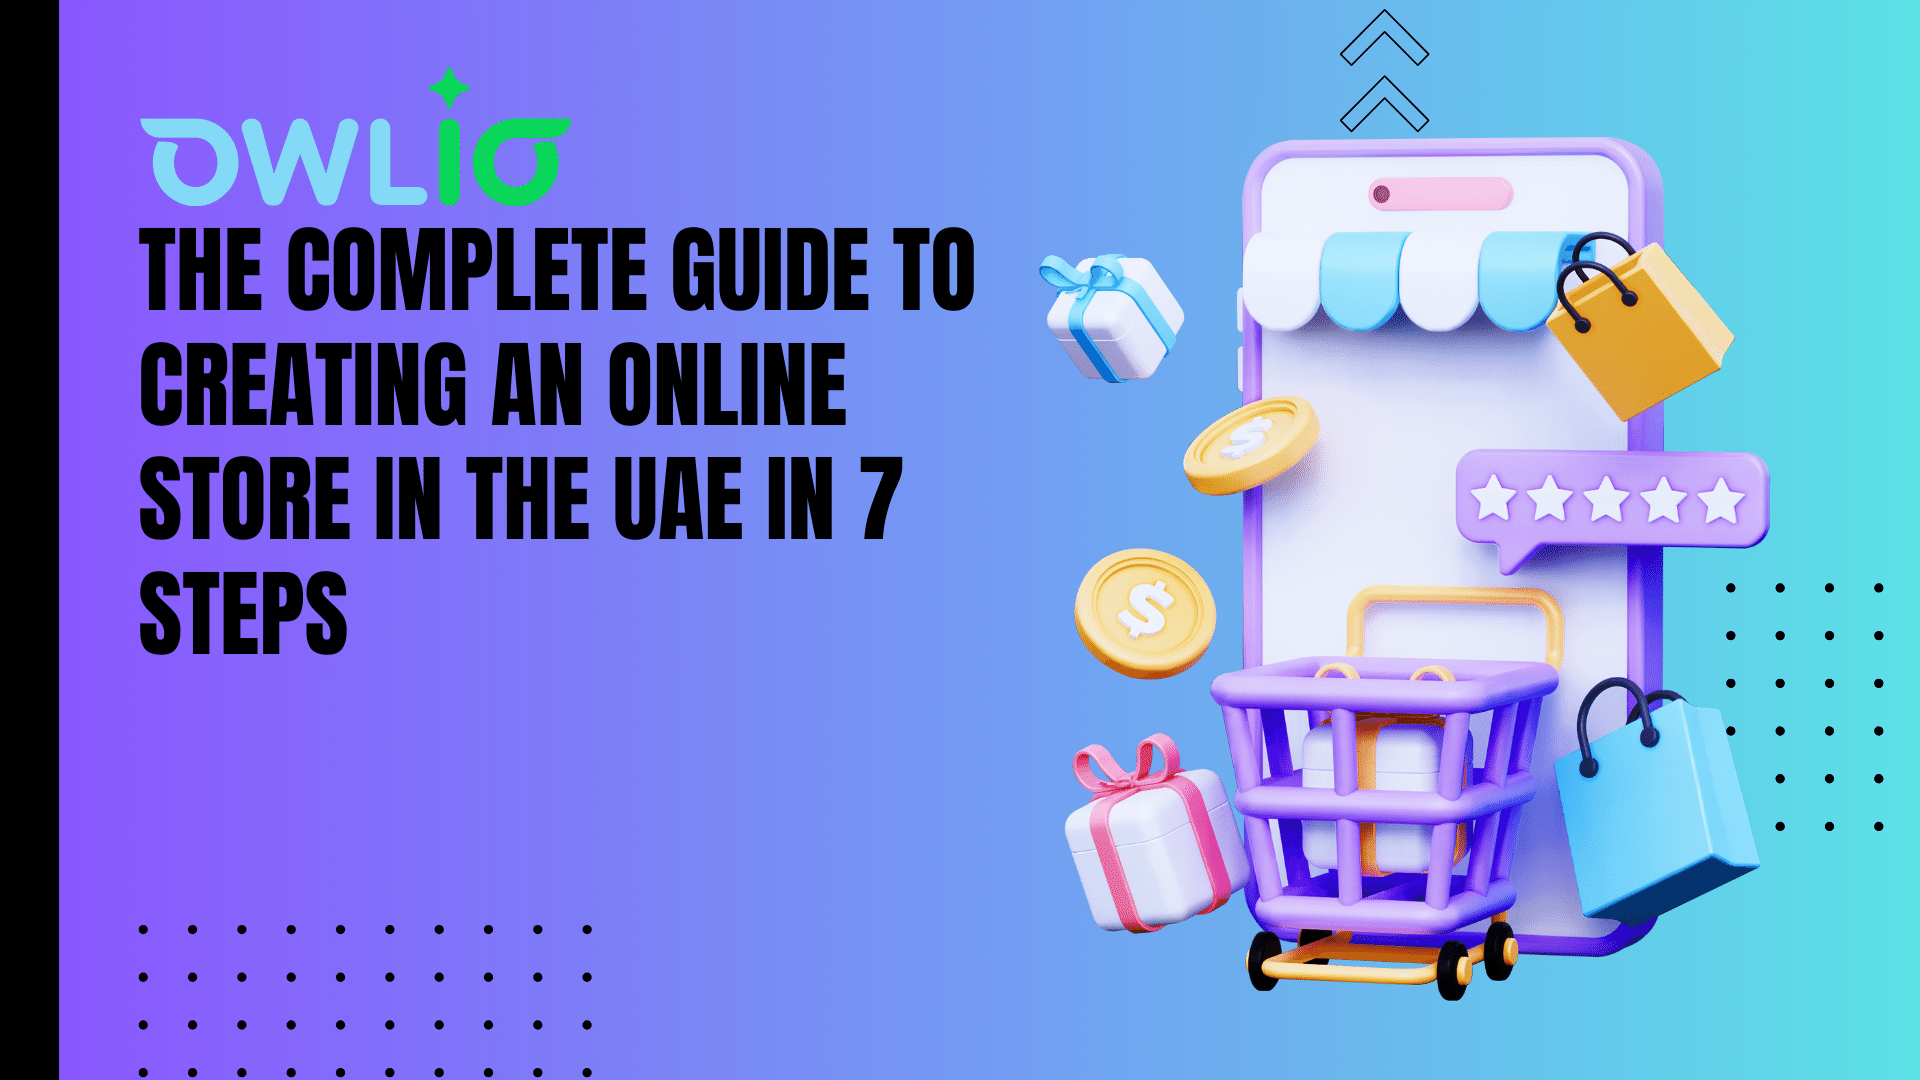 Post Img The Complete Guide to Creating an Online Store in the UAE in 7 Steps